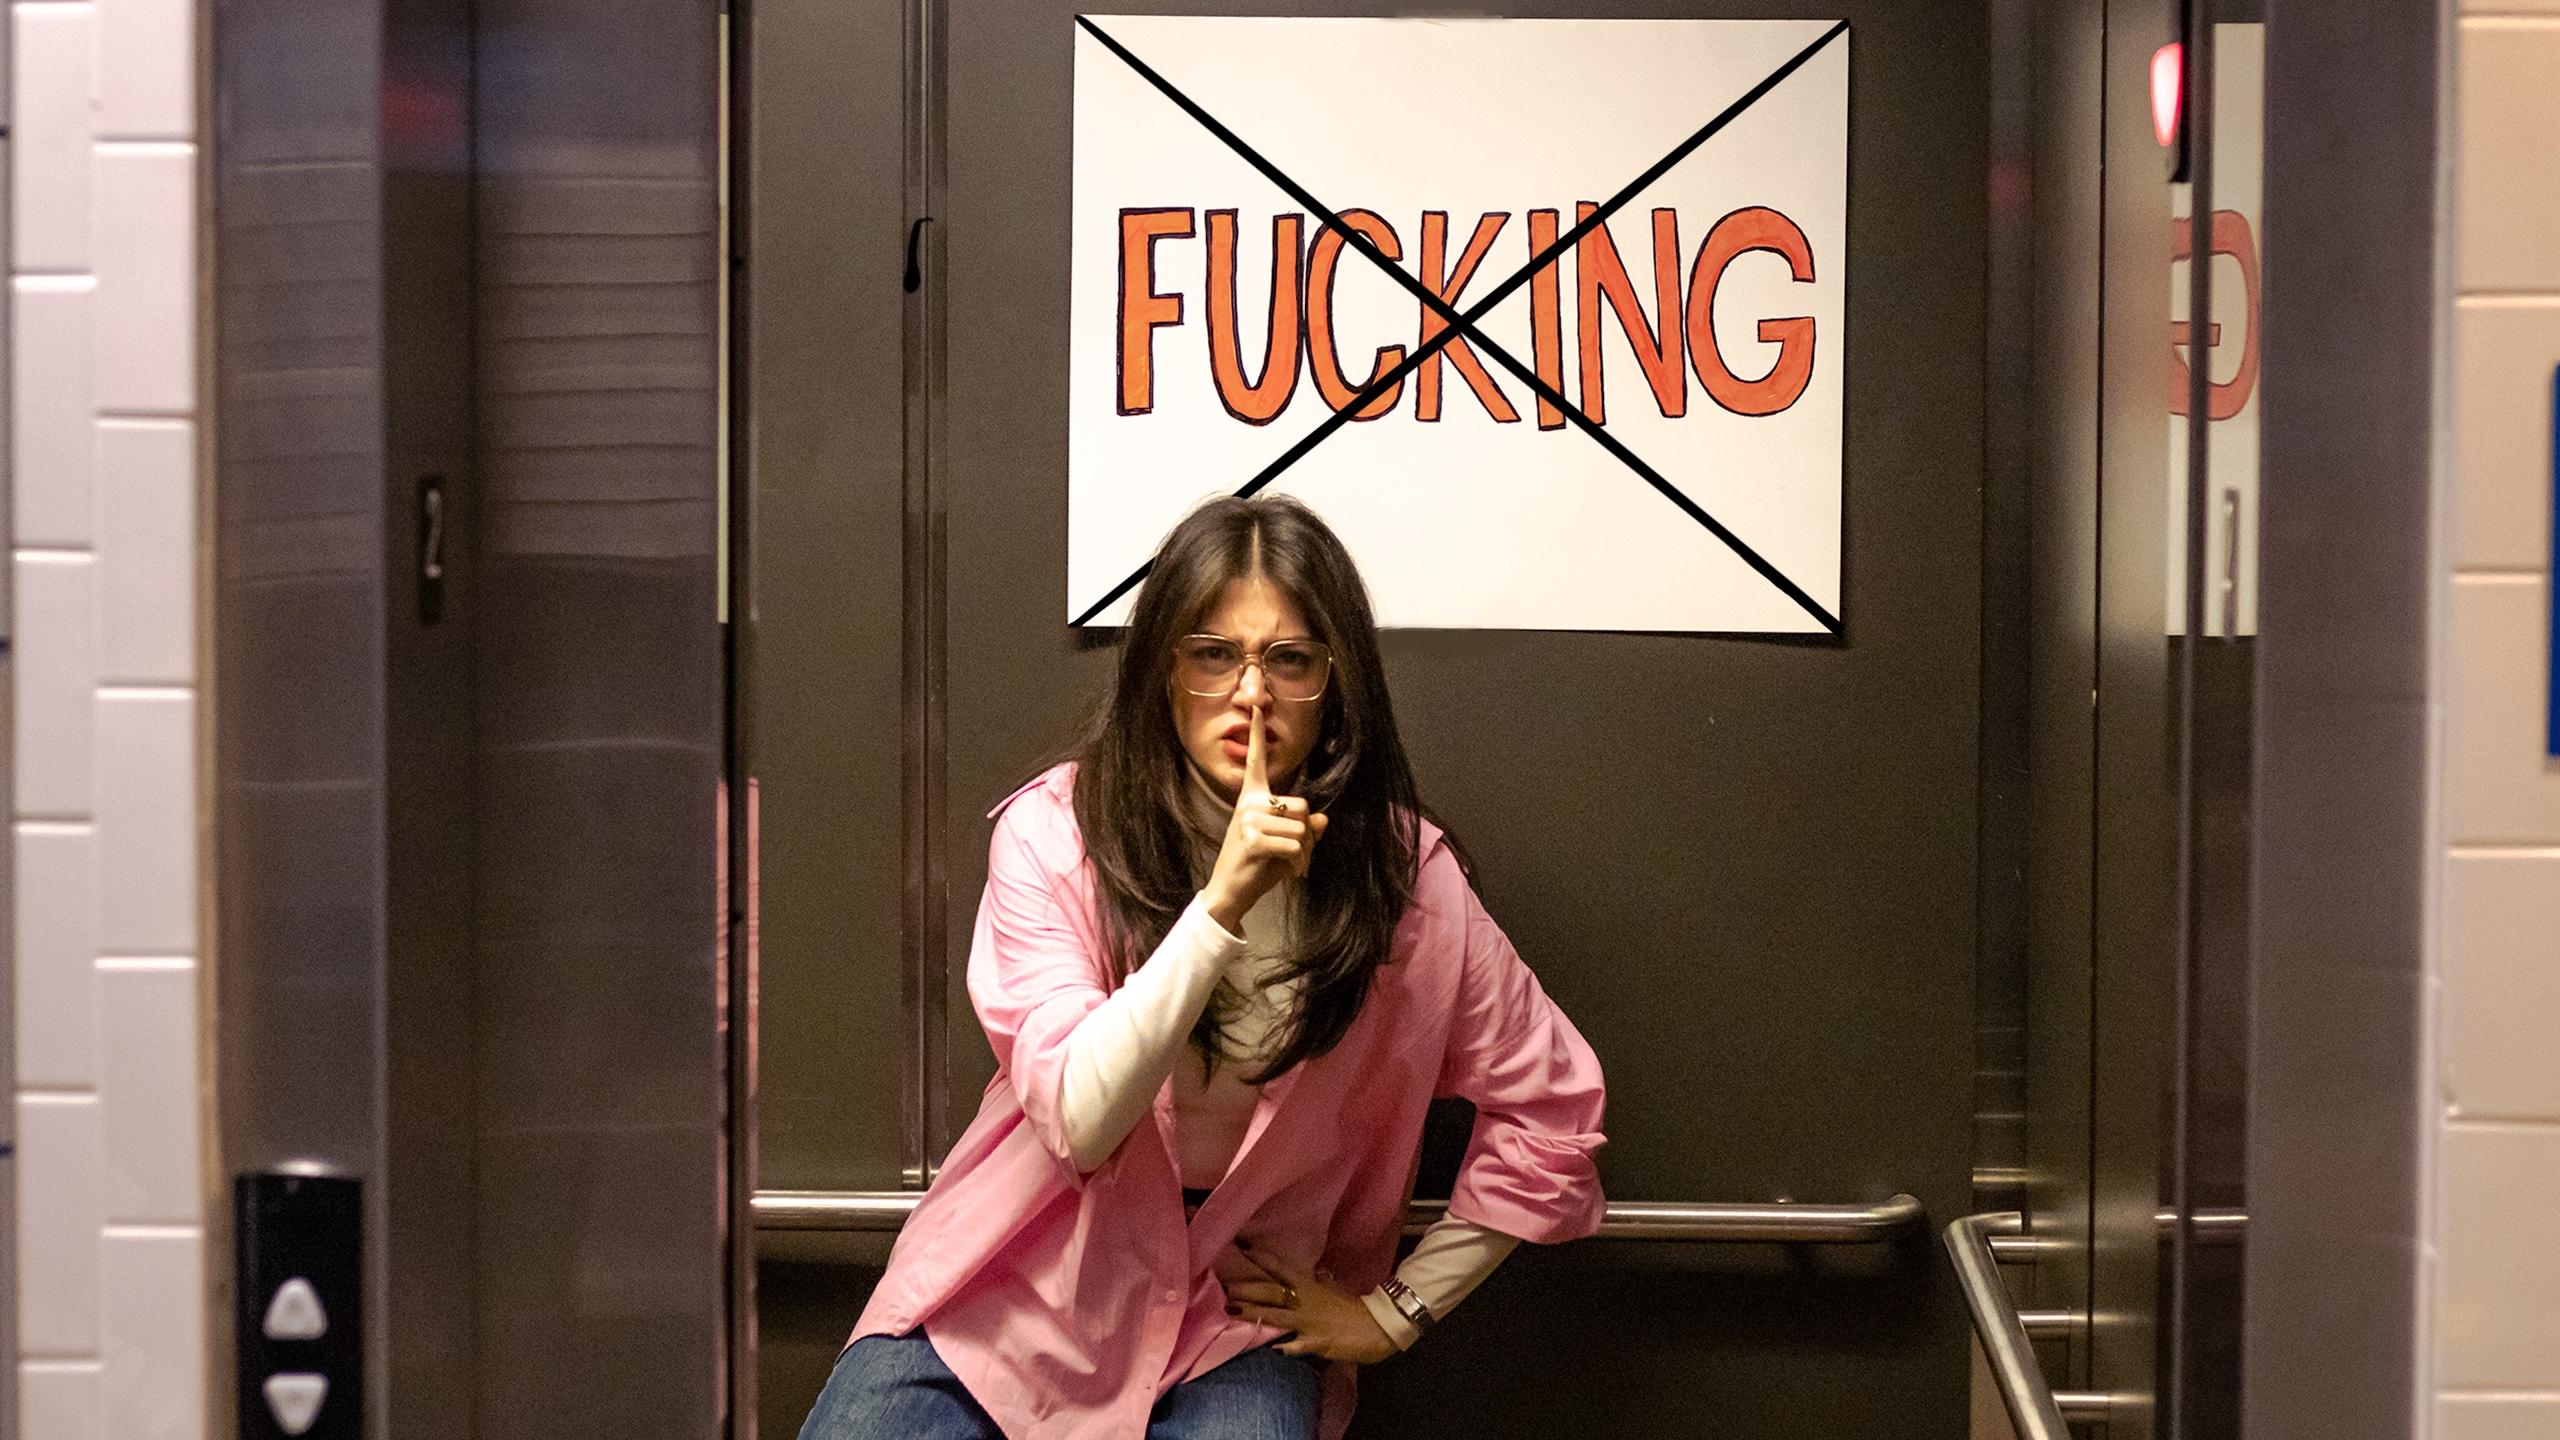 A woman shushing while standing in an elevator. A sign that says "fucking" with an "X" over it hangs above her head.